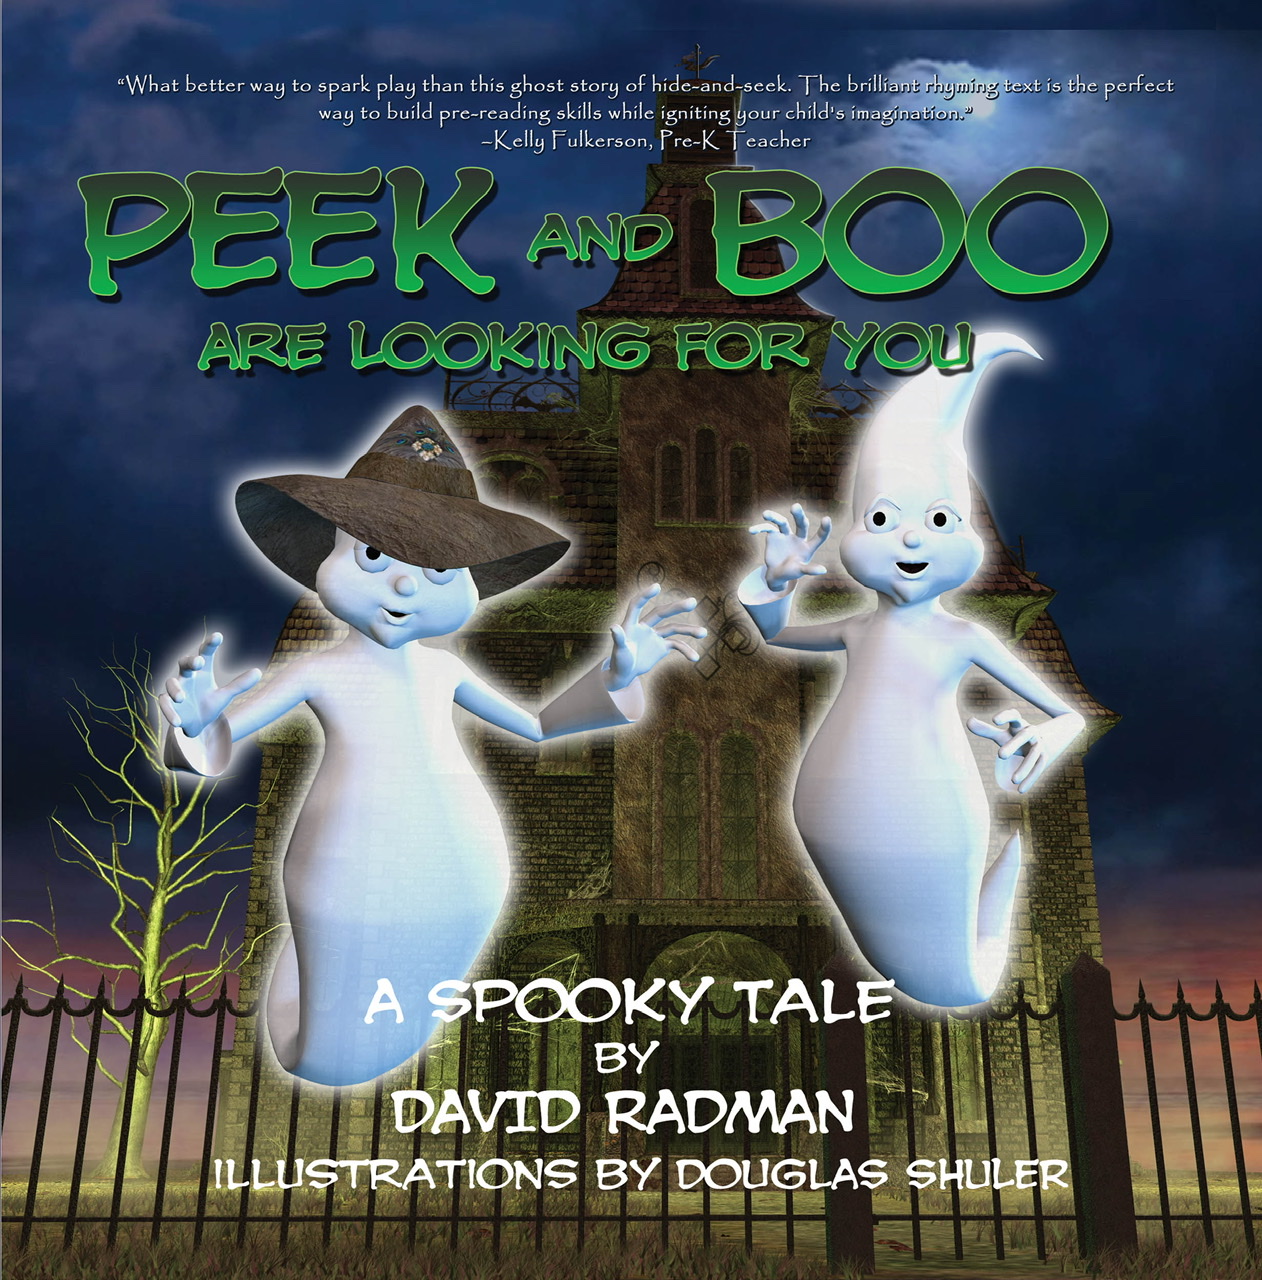 FREE: Peek and Boo are Looking for You by David Radman